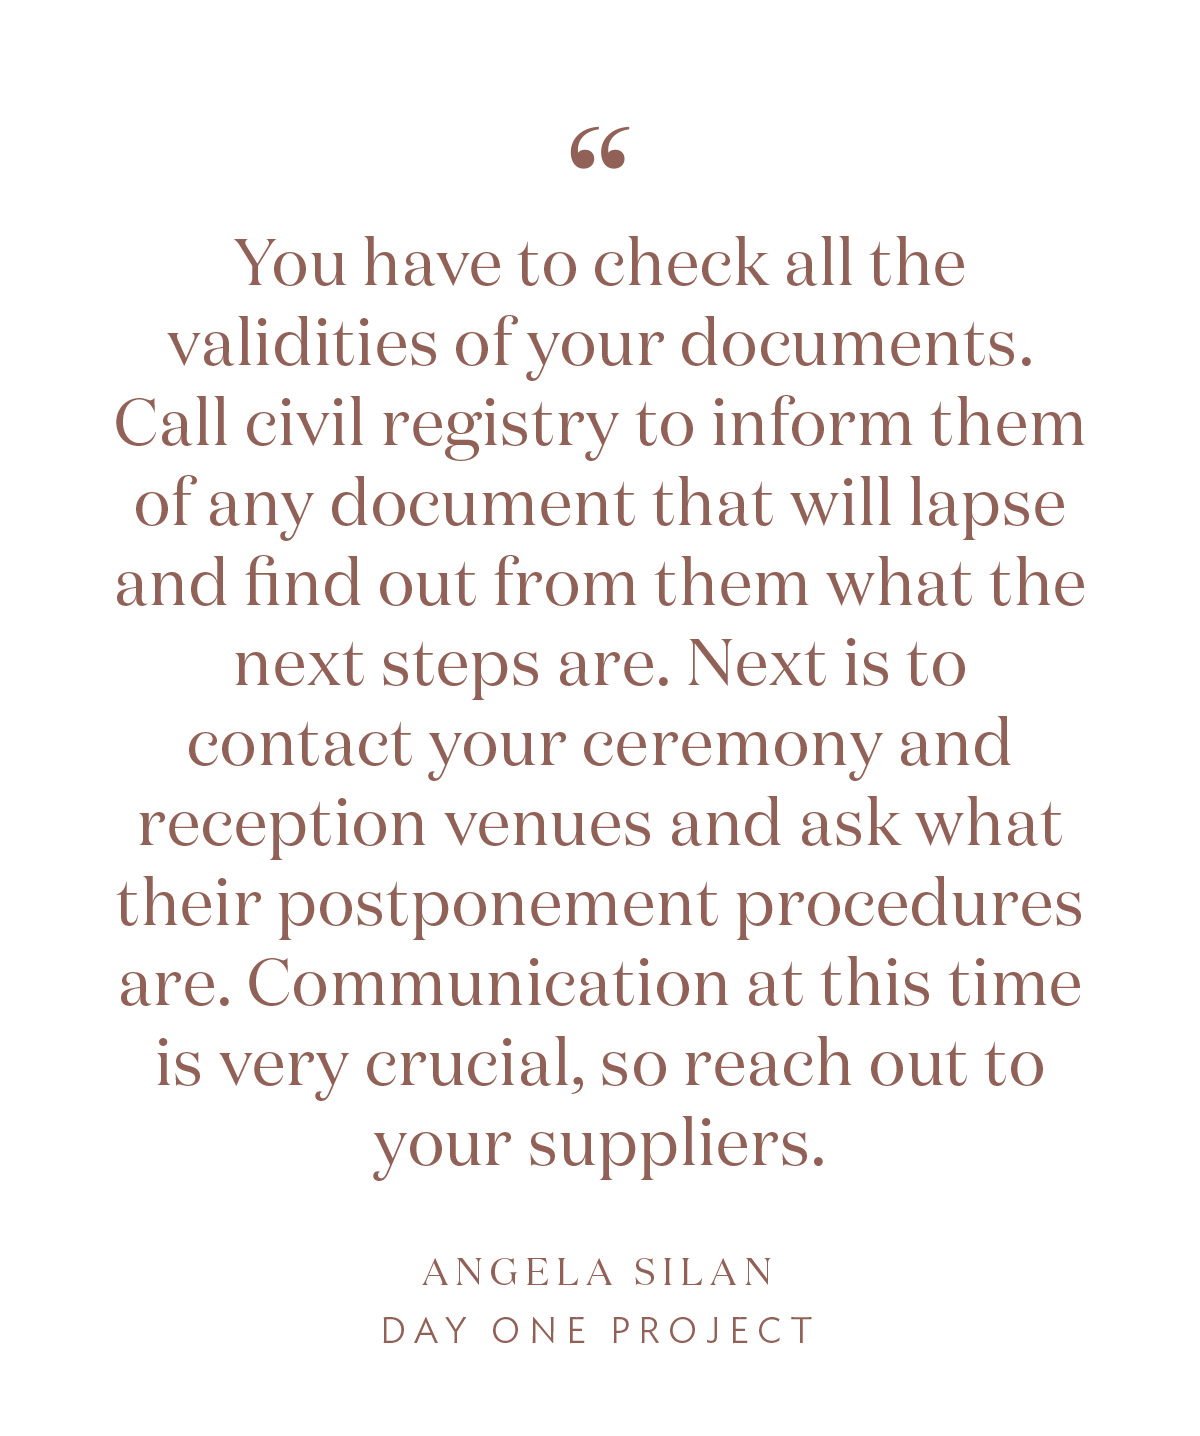 “You have to check all the validities of your documents. Call civil registry to inform them of any document that will lapse and find out from them what the next steps are. Next is to contact your ceremony and reception venues and ask what their postponement procedures are. Communication at this time is very crucial, so reach out to your suppliers.” -Angela Silan, Day One Project